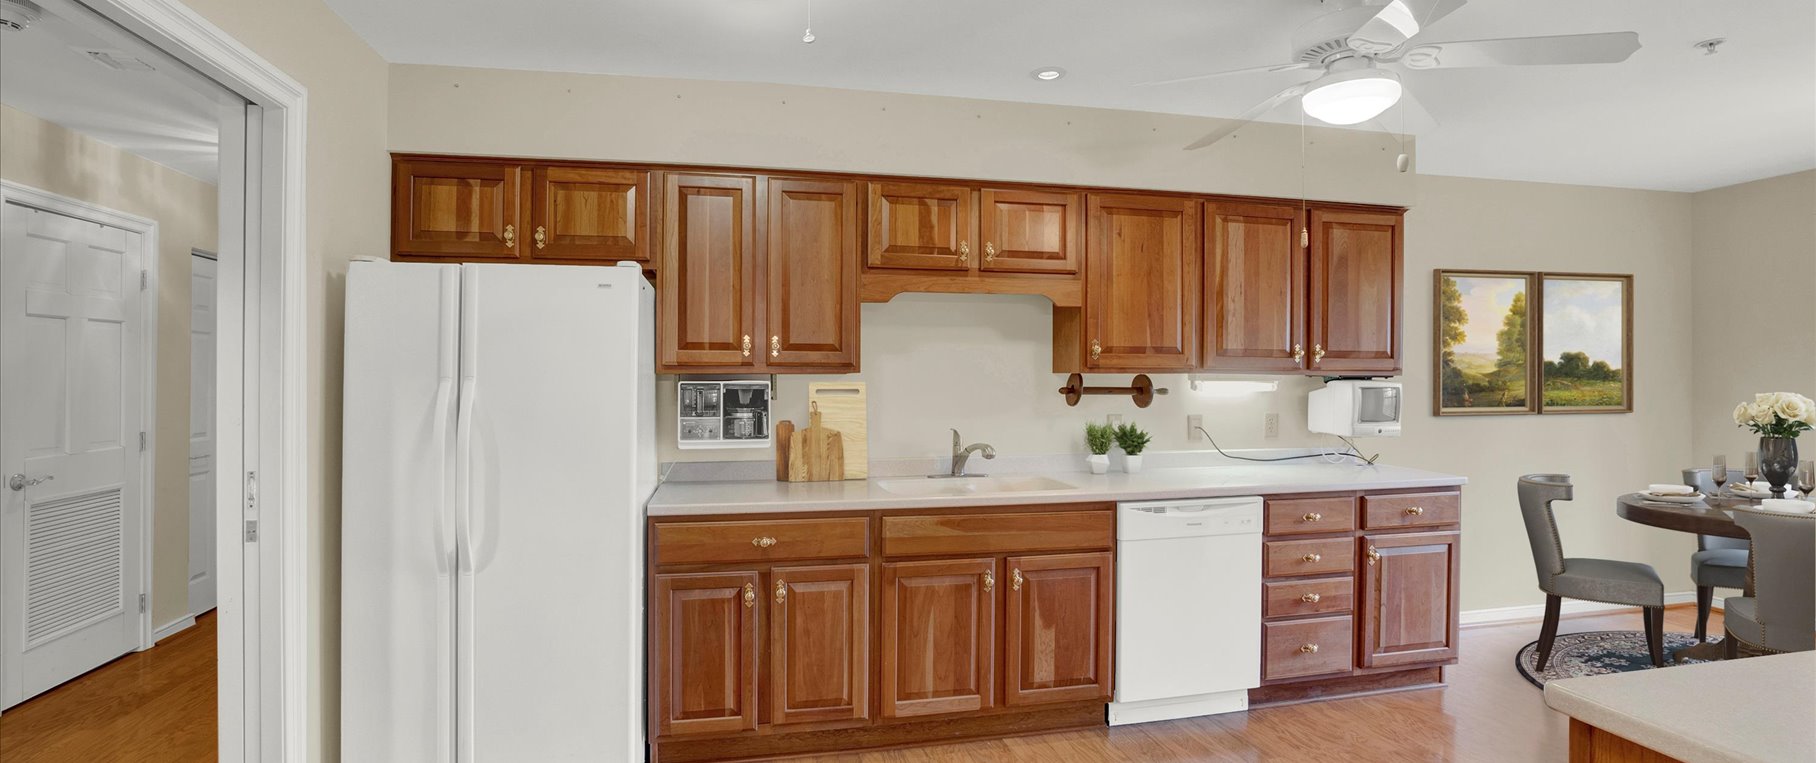 kitchen with oak cabinetry